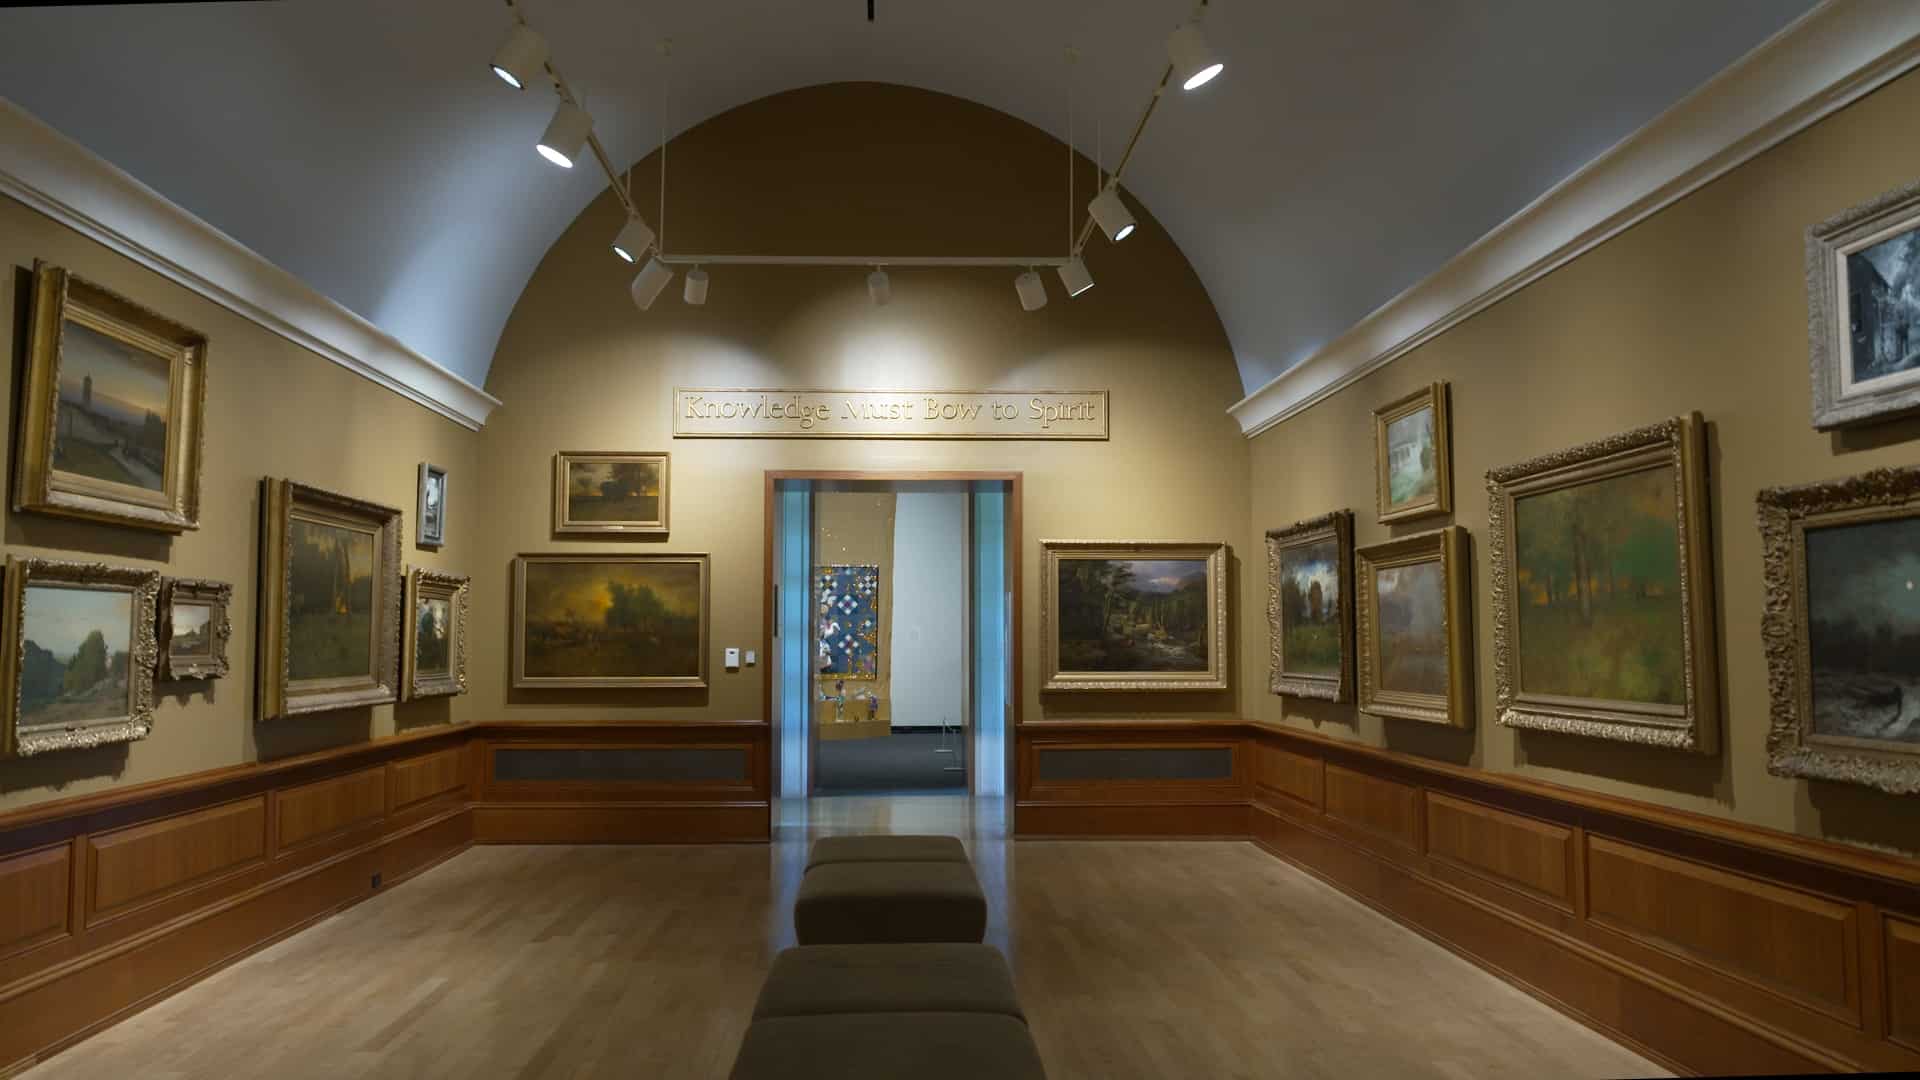 Interior view of the George Inness Gallery at the Montclair Art Museum